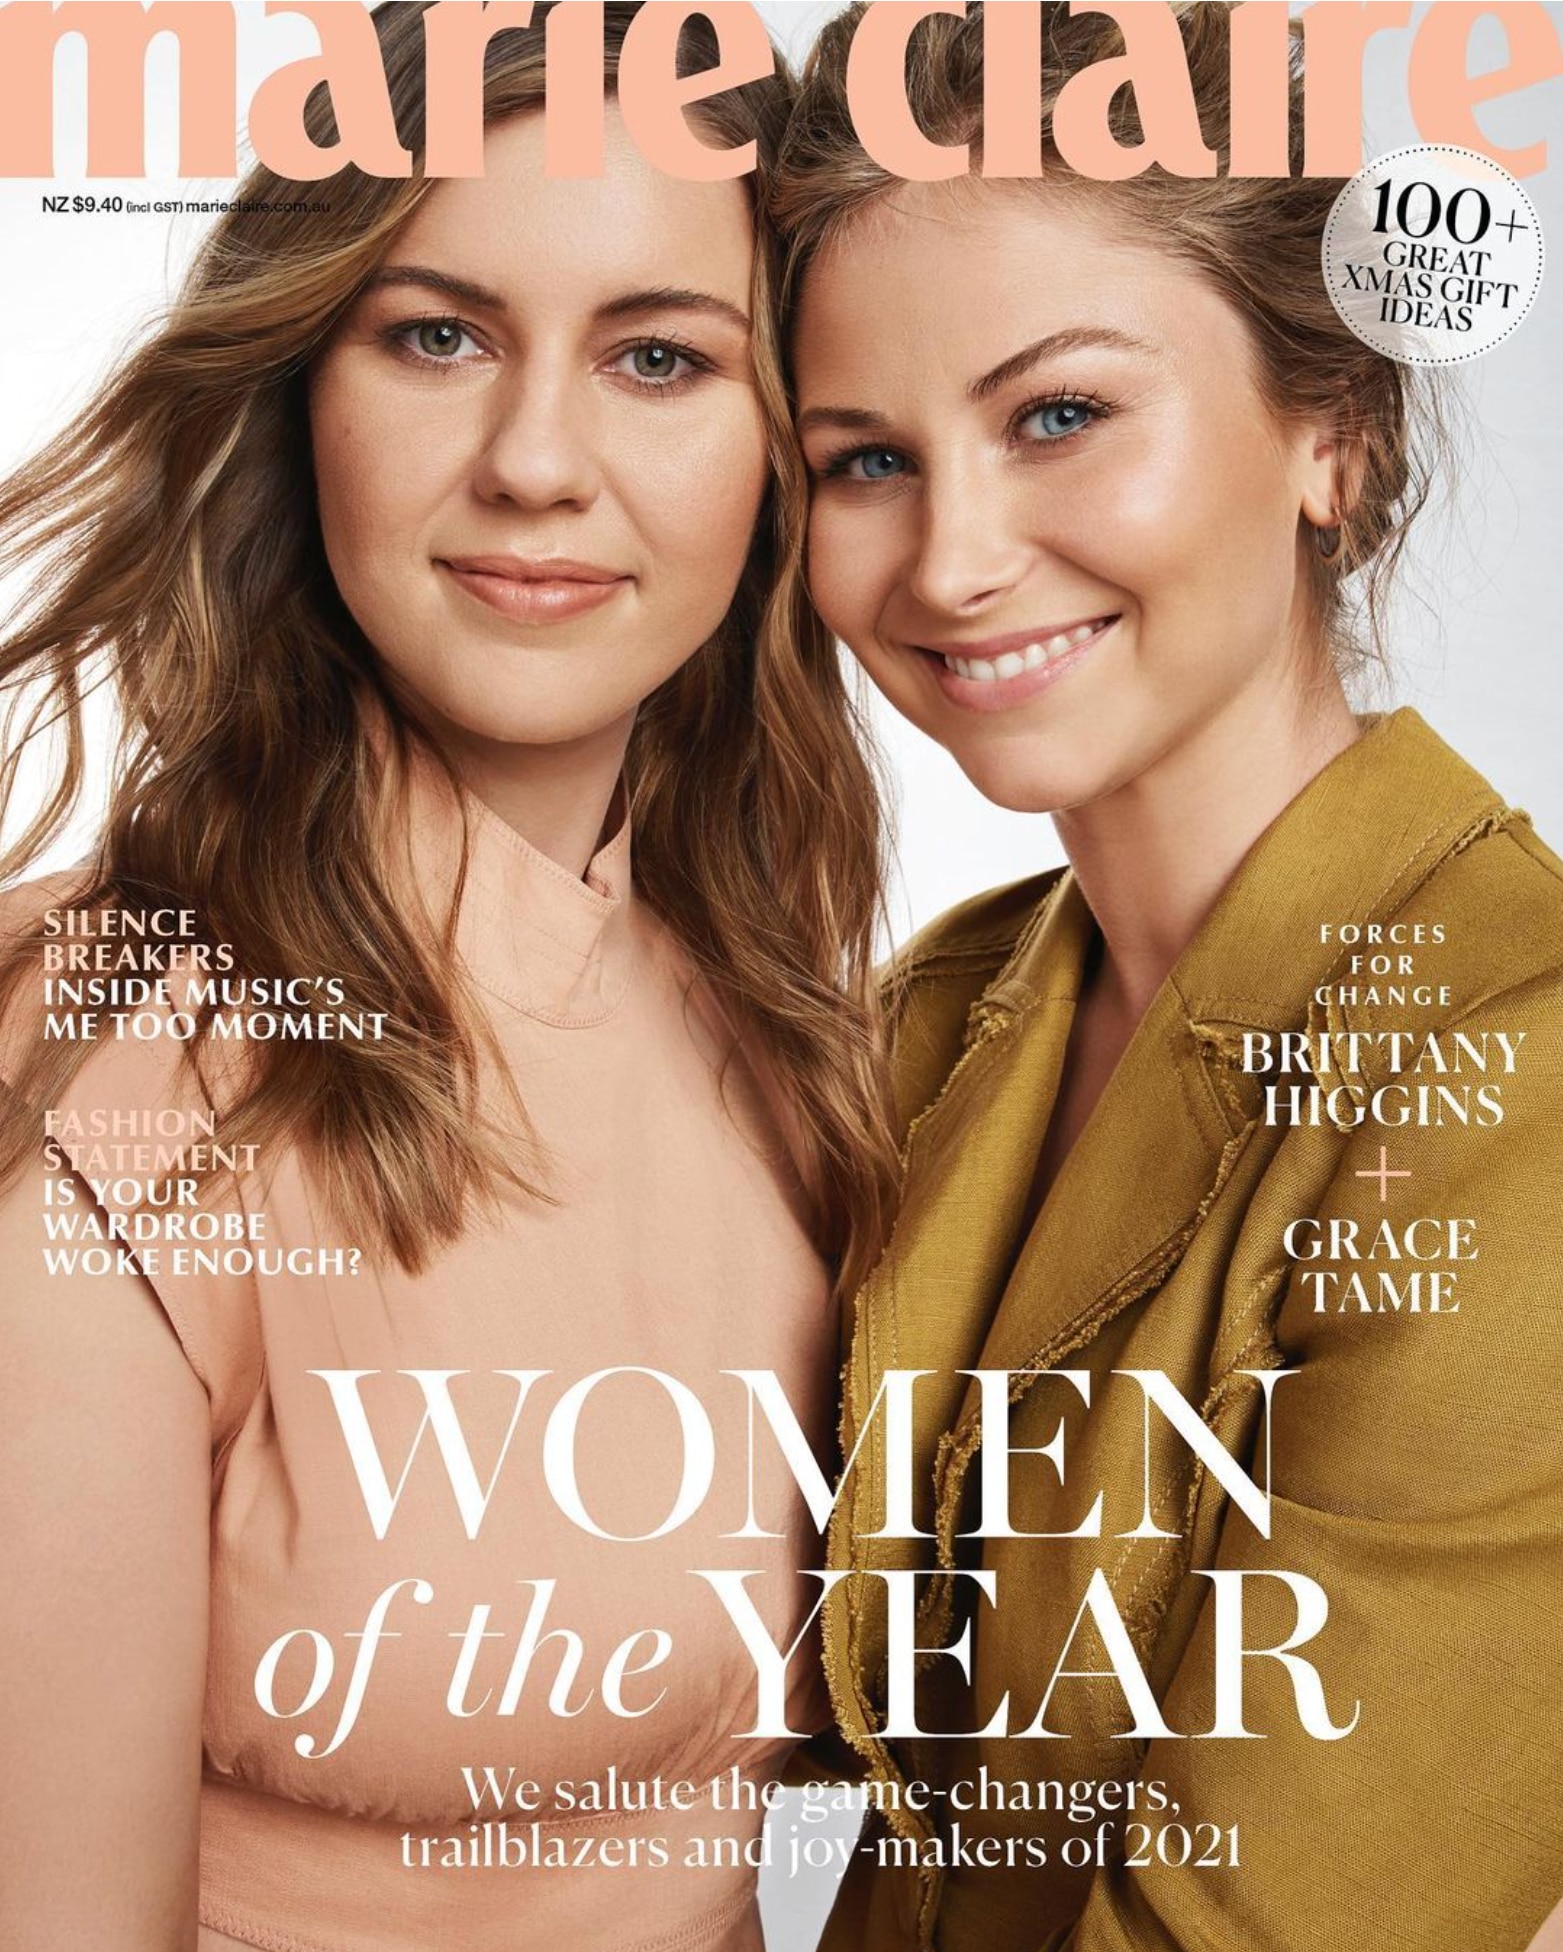 Brittany Higgins and Grace Tame on the cover of Marie Claire.